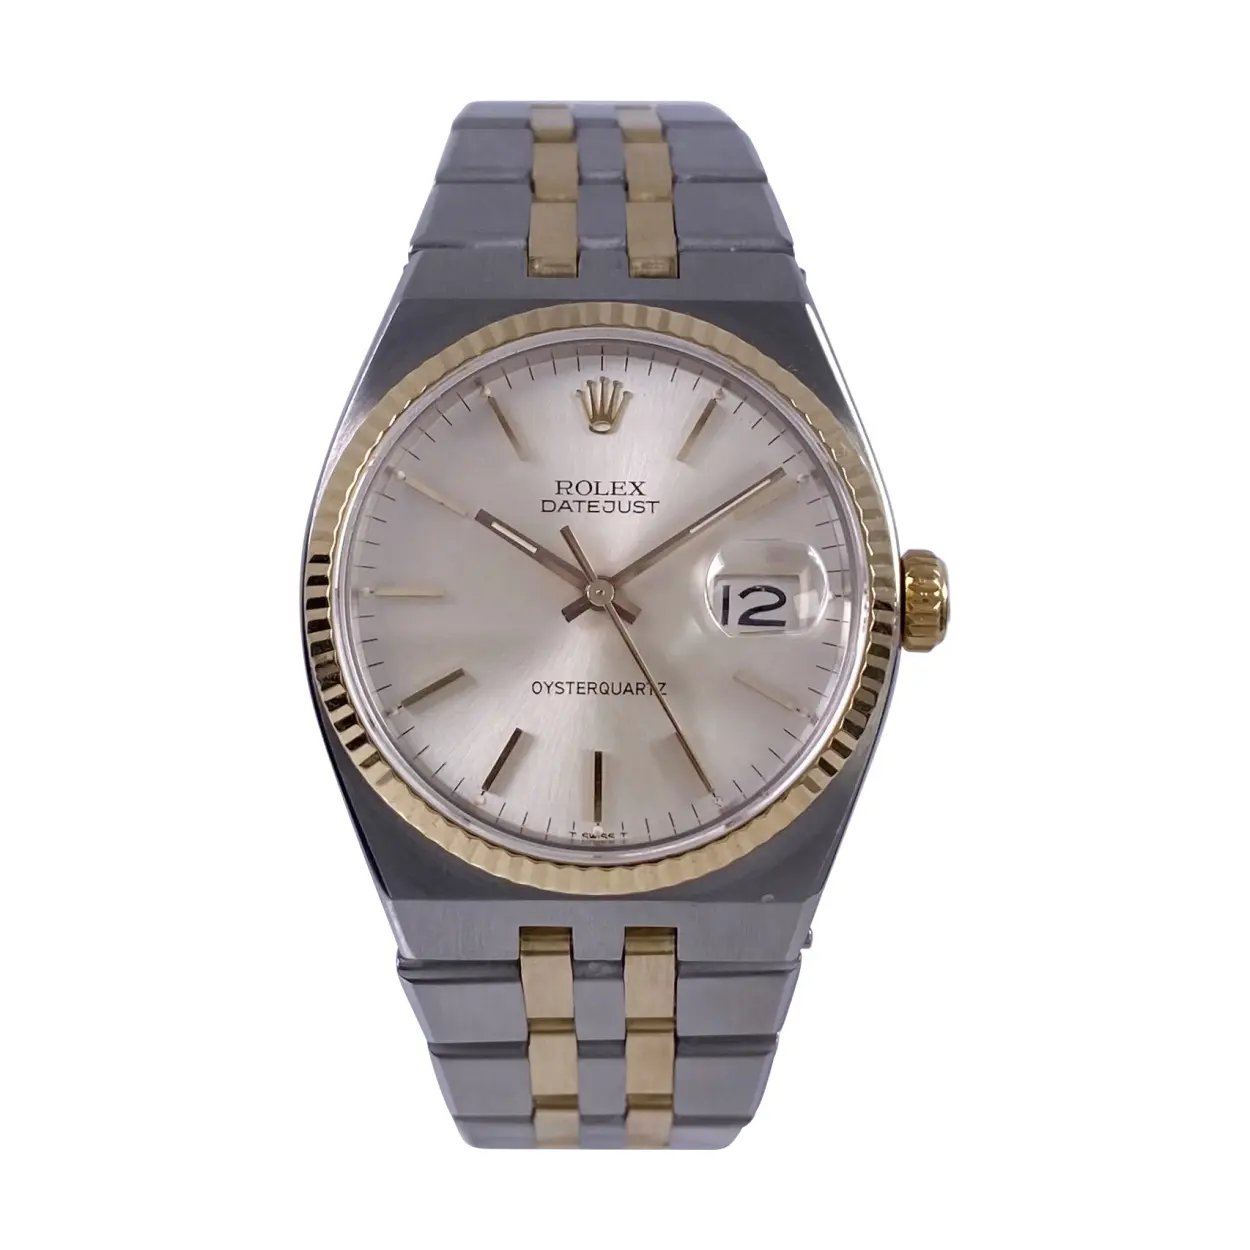 Rolex Datejust Oysterquartz 17013 36mm Yellow gold and stainless steel Silver